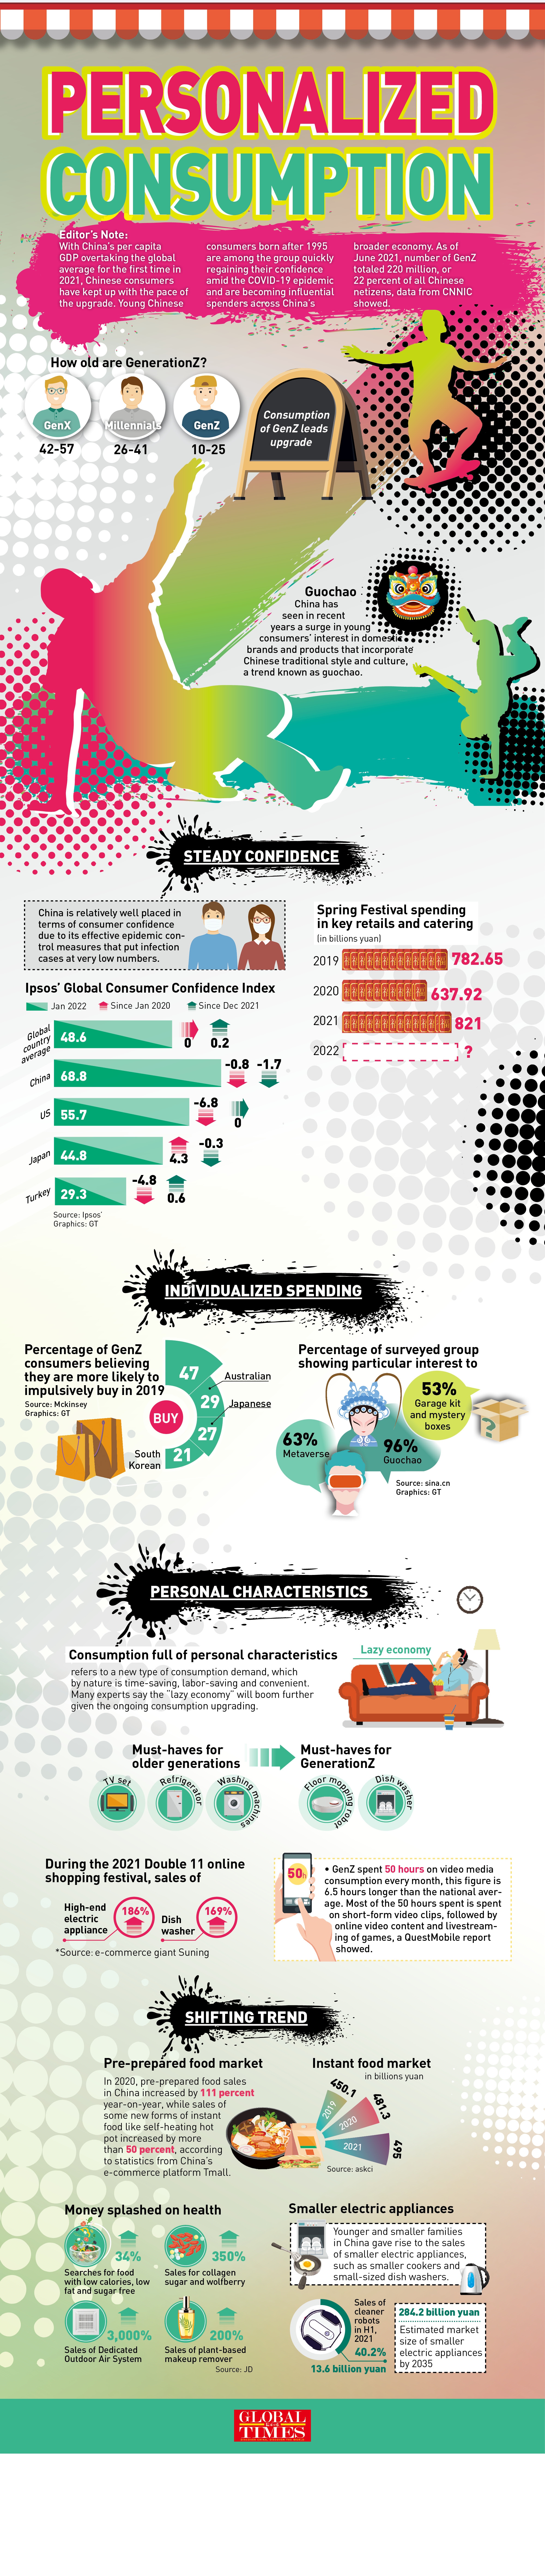 Personalized consumption Infographic: GT